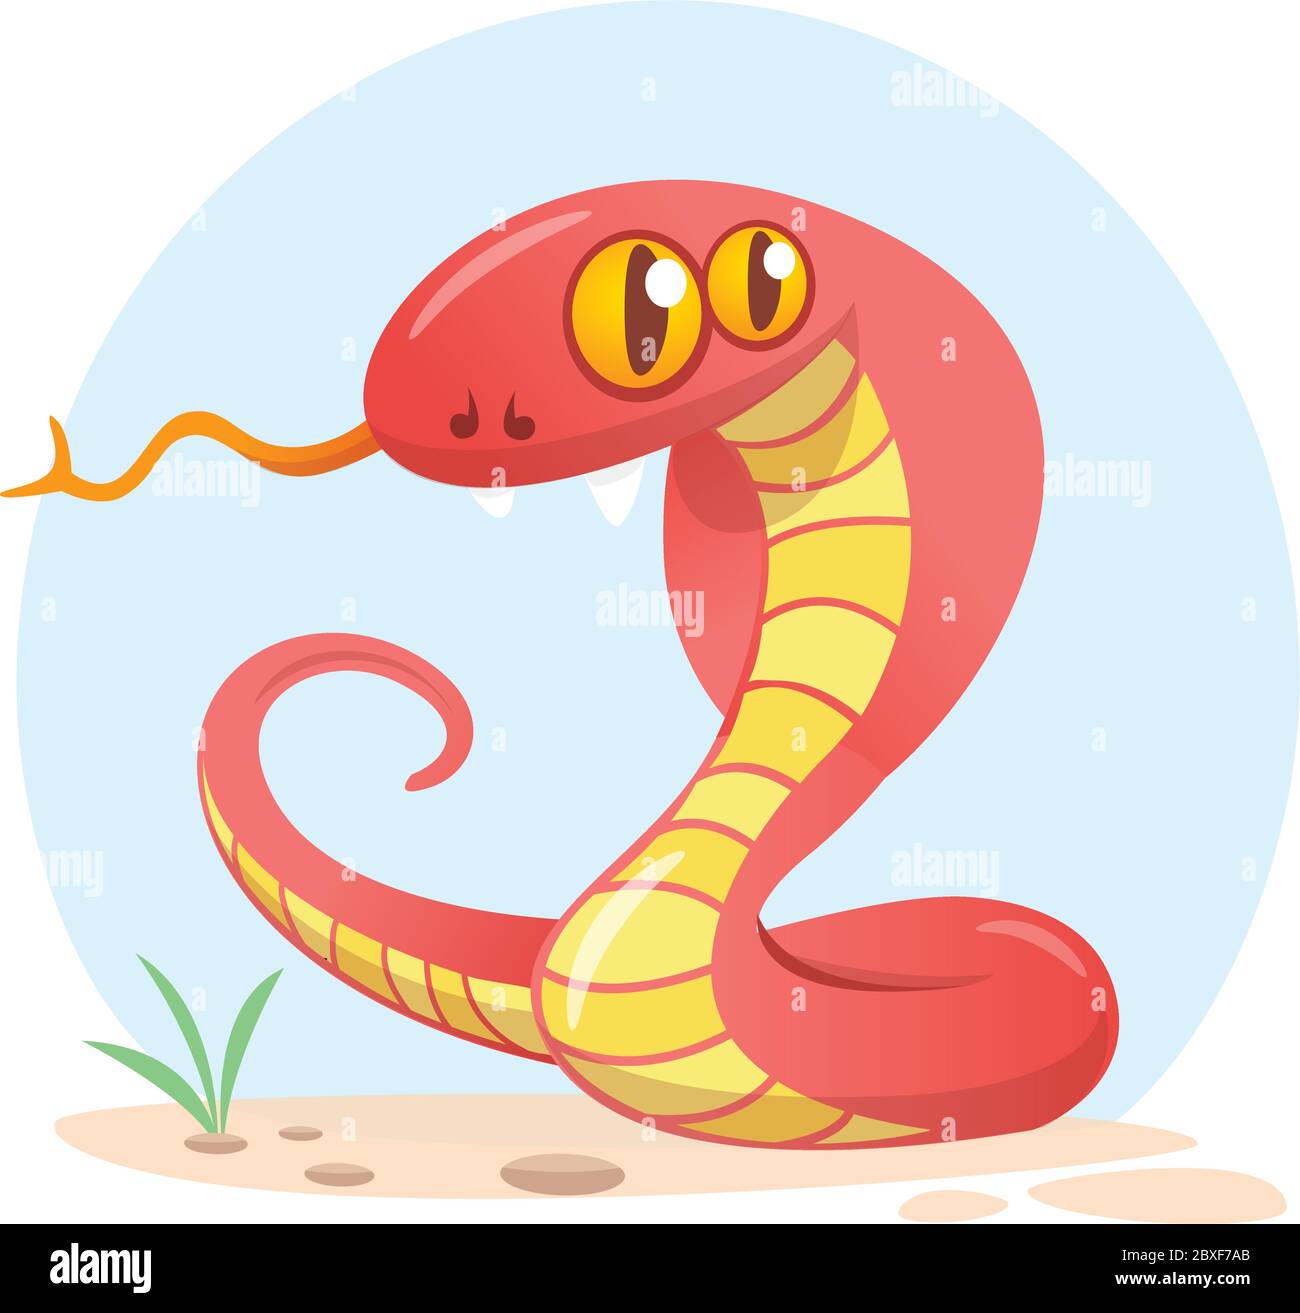 Cartoon red snake. Cute cartoon character. Wild animal collection. Baby education. Isolated. White background. Flat design Vector illustration Stock Vector